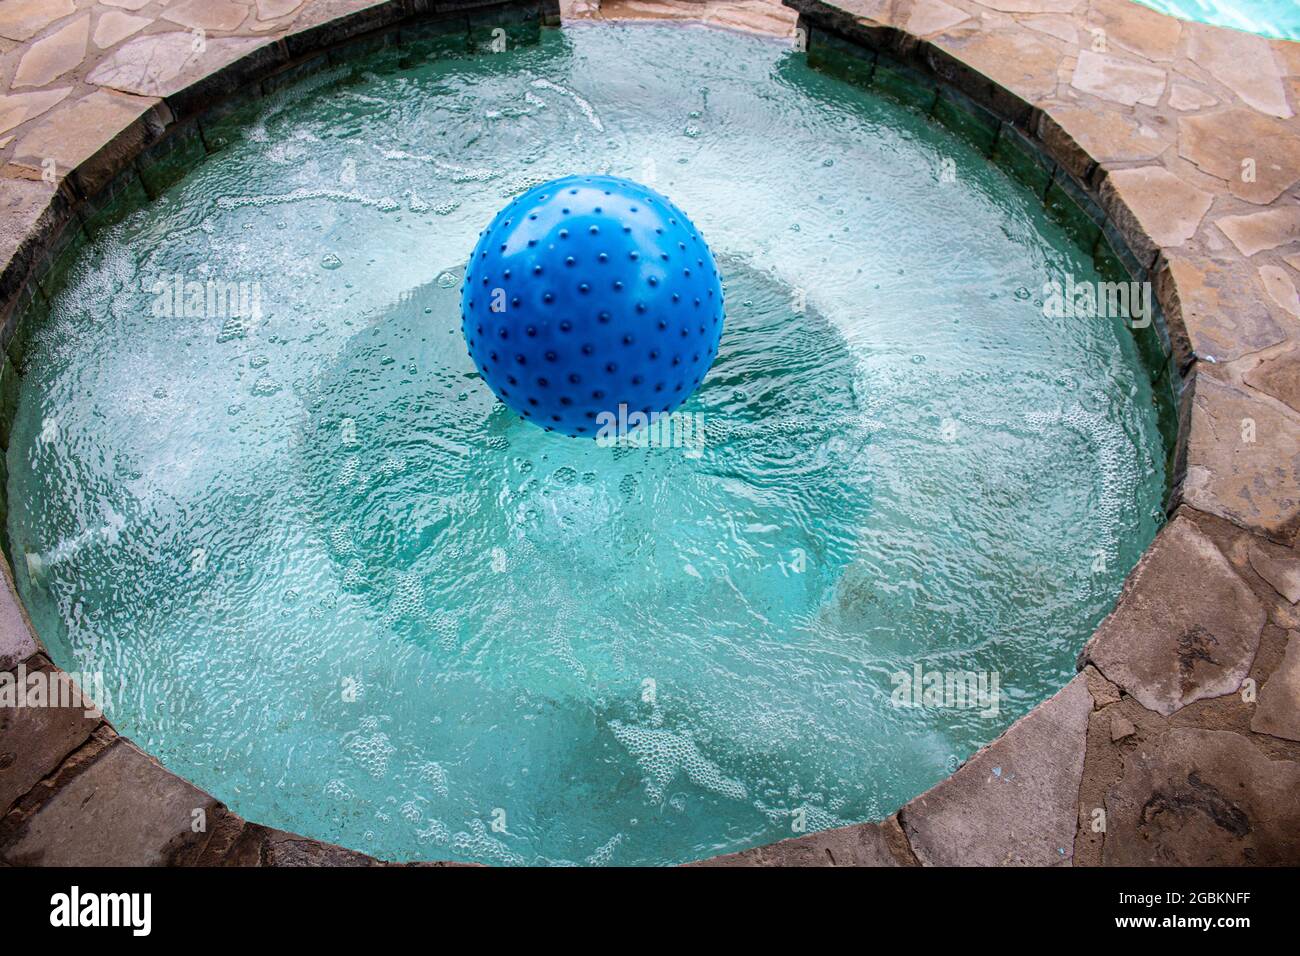 Bumpy blue beach ball floating in built-in hot tub in rock patio - top view Stock Photo